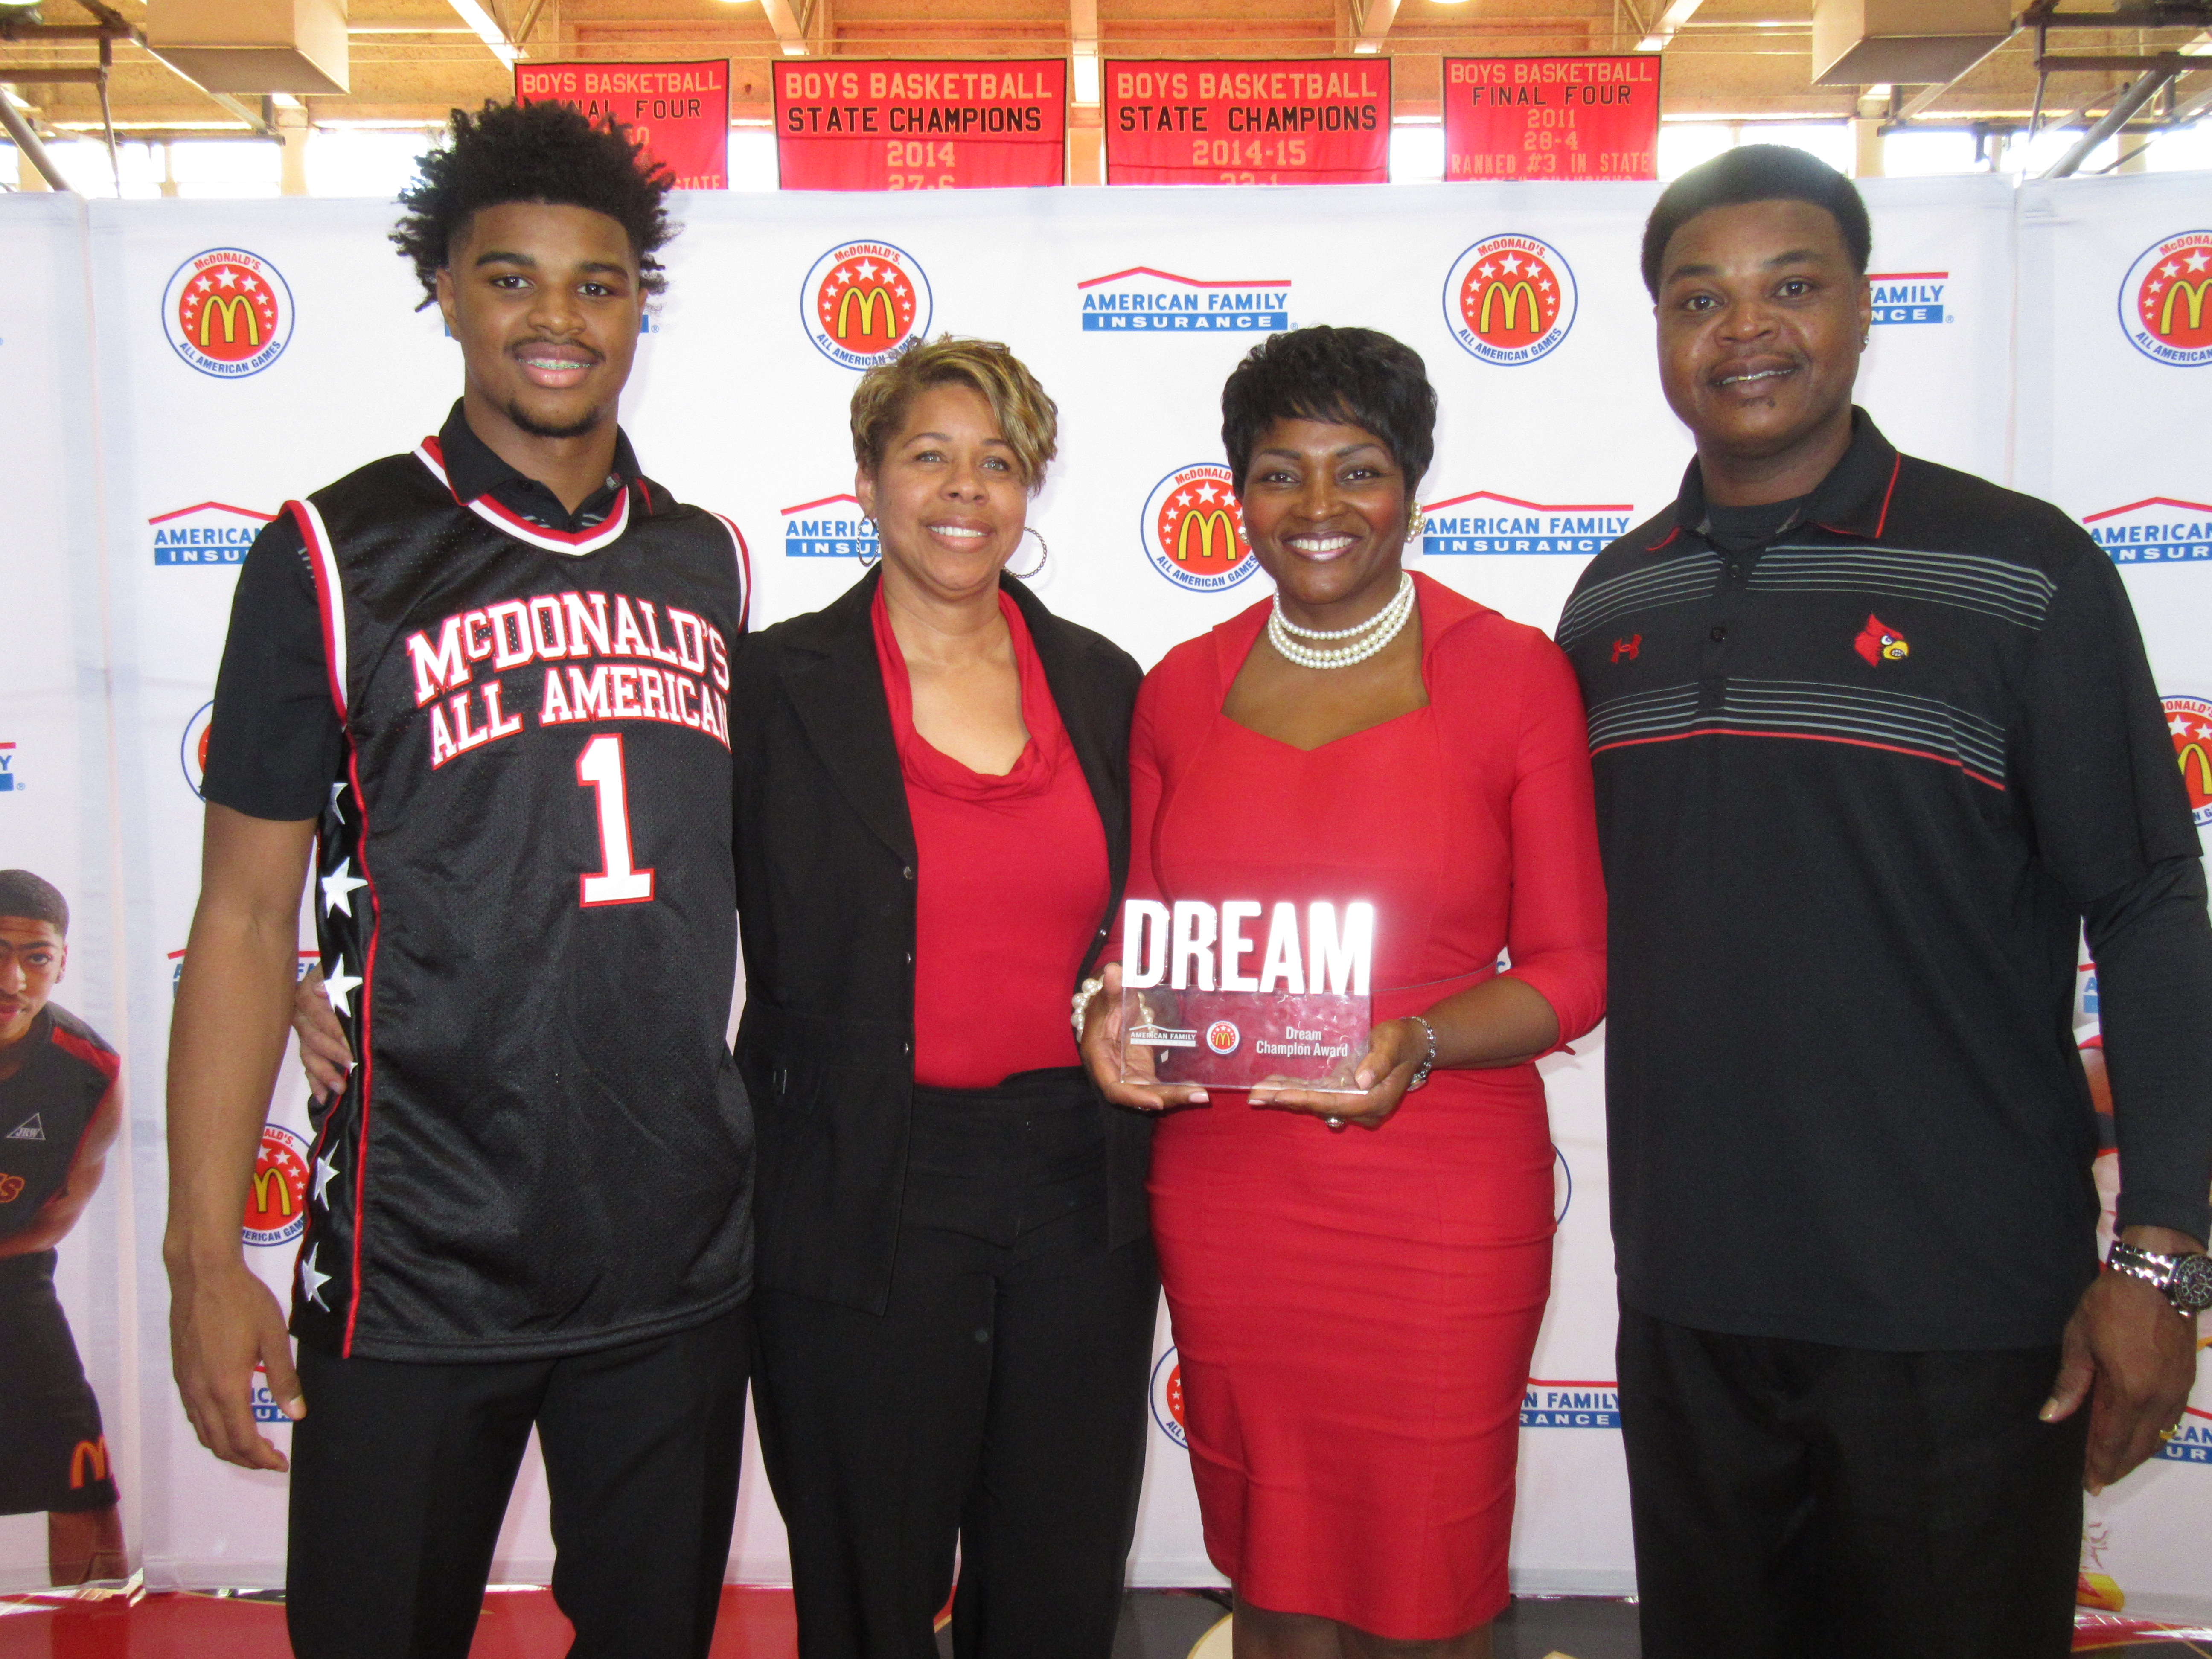 MJ Walker presents his Dream Champion award to his parents. They are joined by a representative from American Family Insurance (Photo: McDAAG)